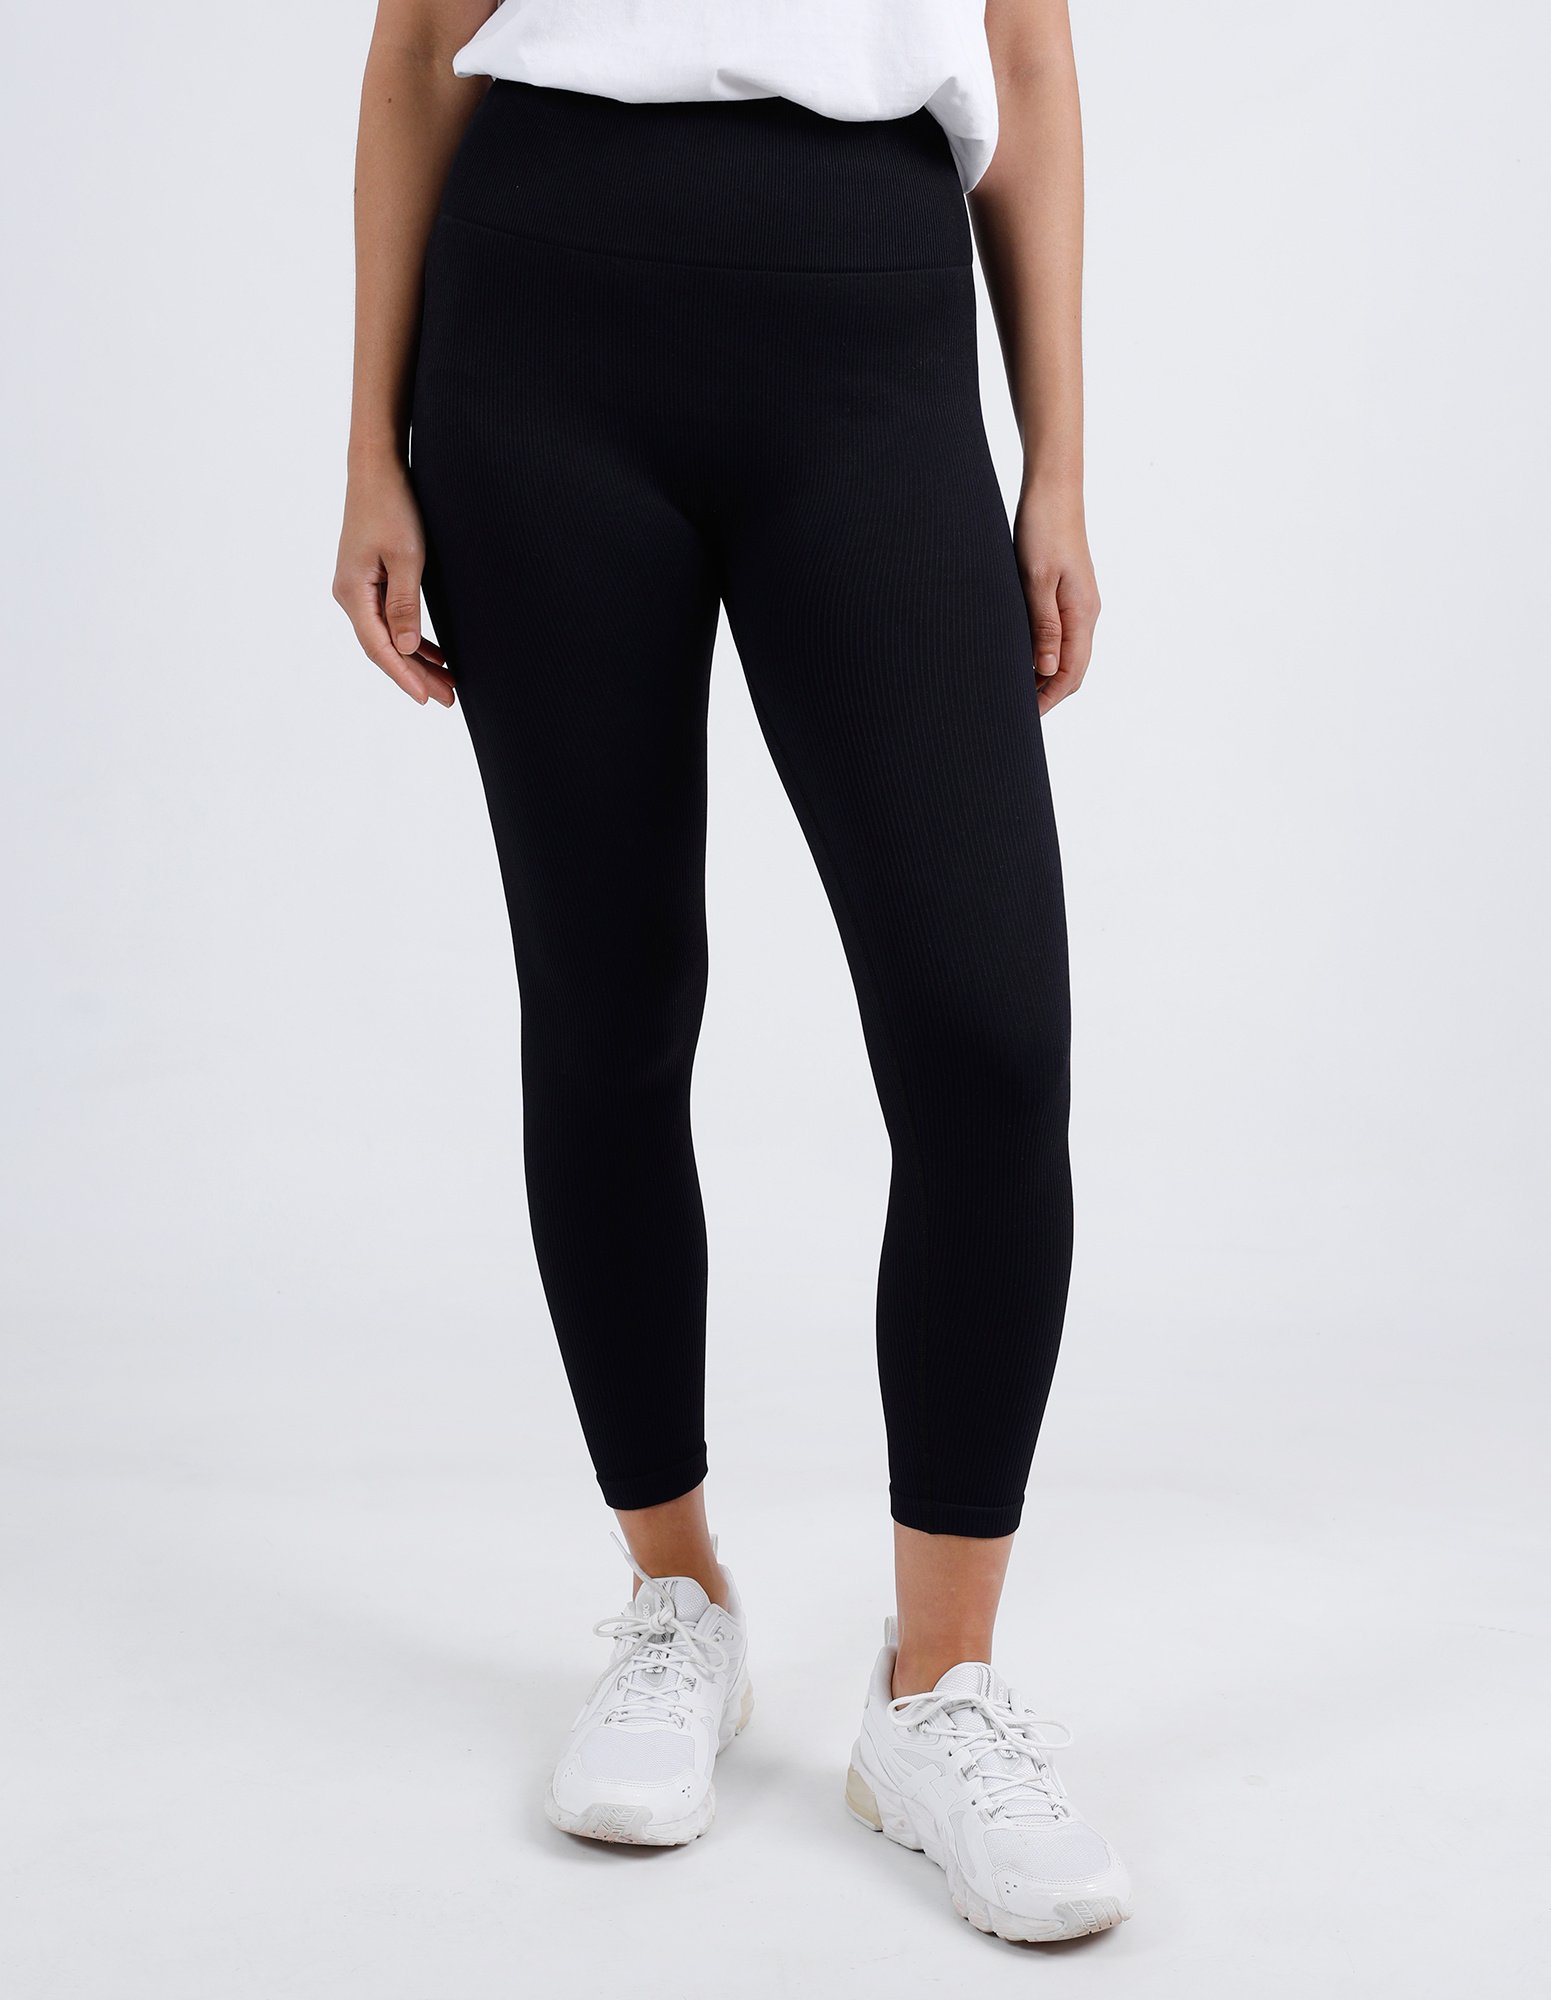 Buy Thermal Leggings Nz | International Society of Precision Agriculture